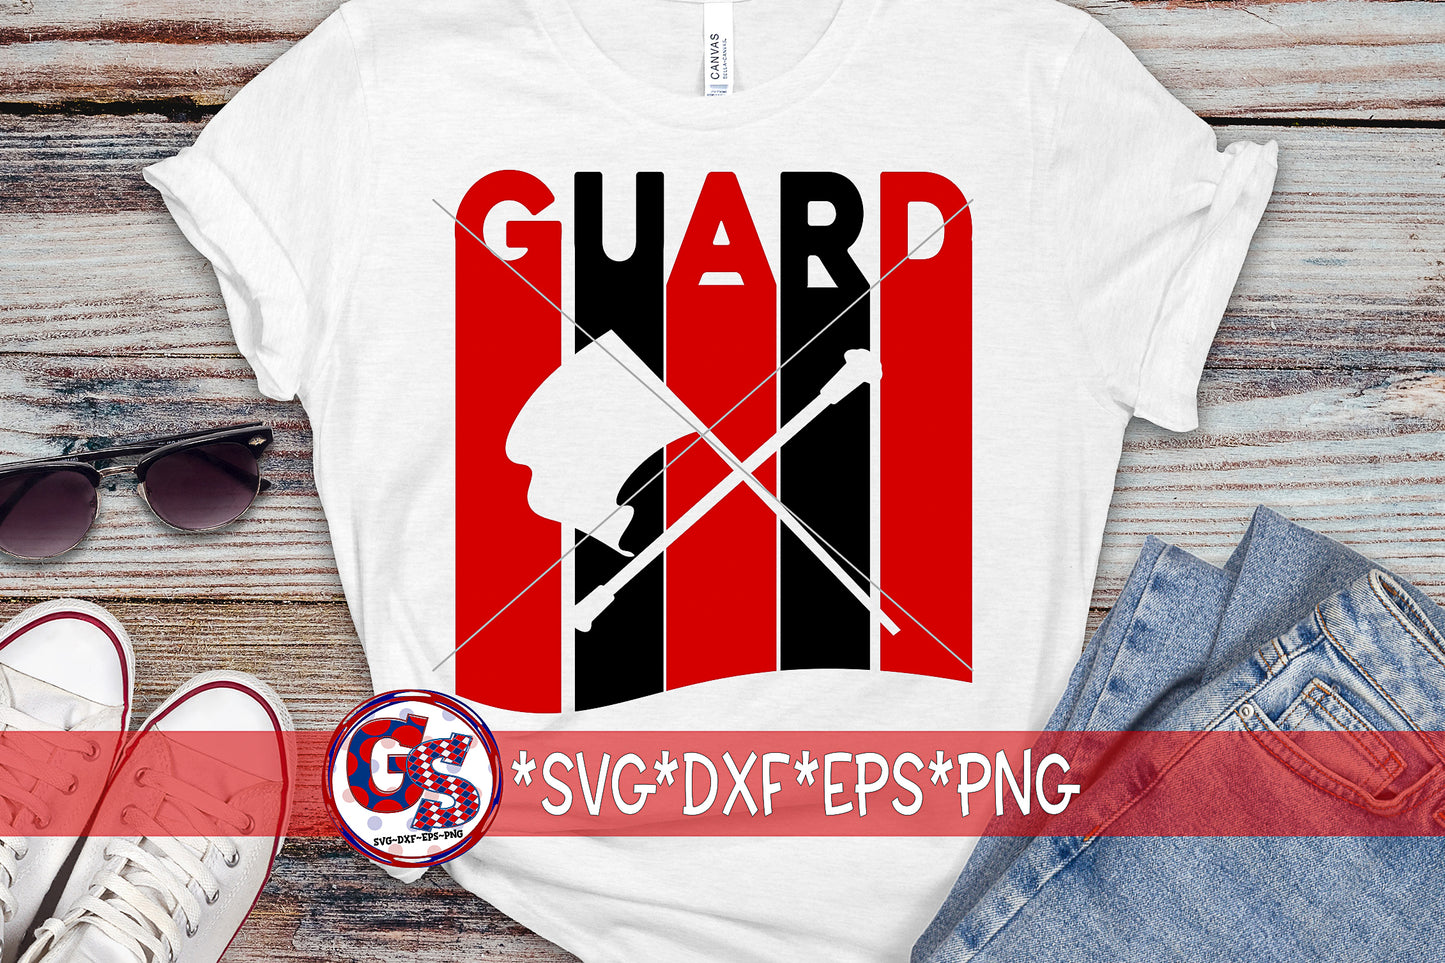 Guard SVG DXF EPS PNG